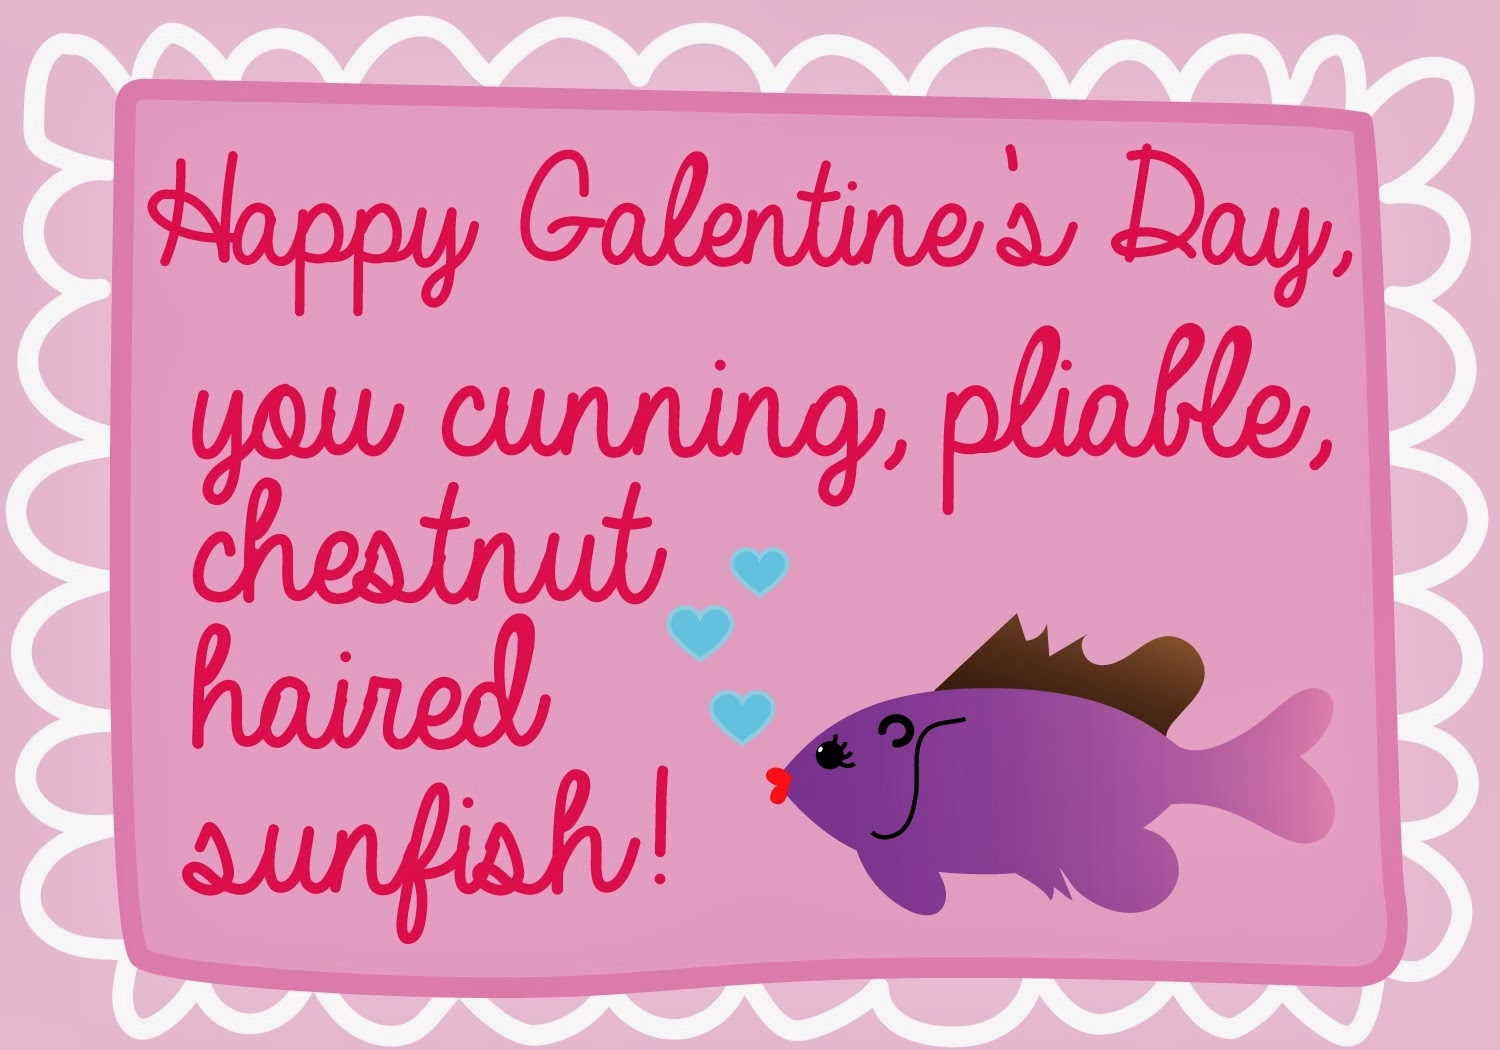 ... with Caitlin: Happy (belated) Galentine's Day!